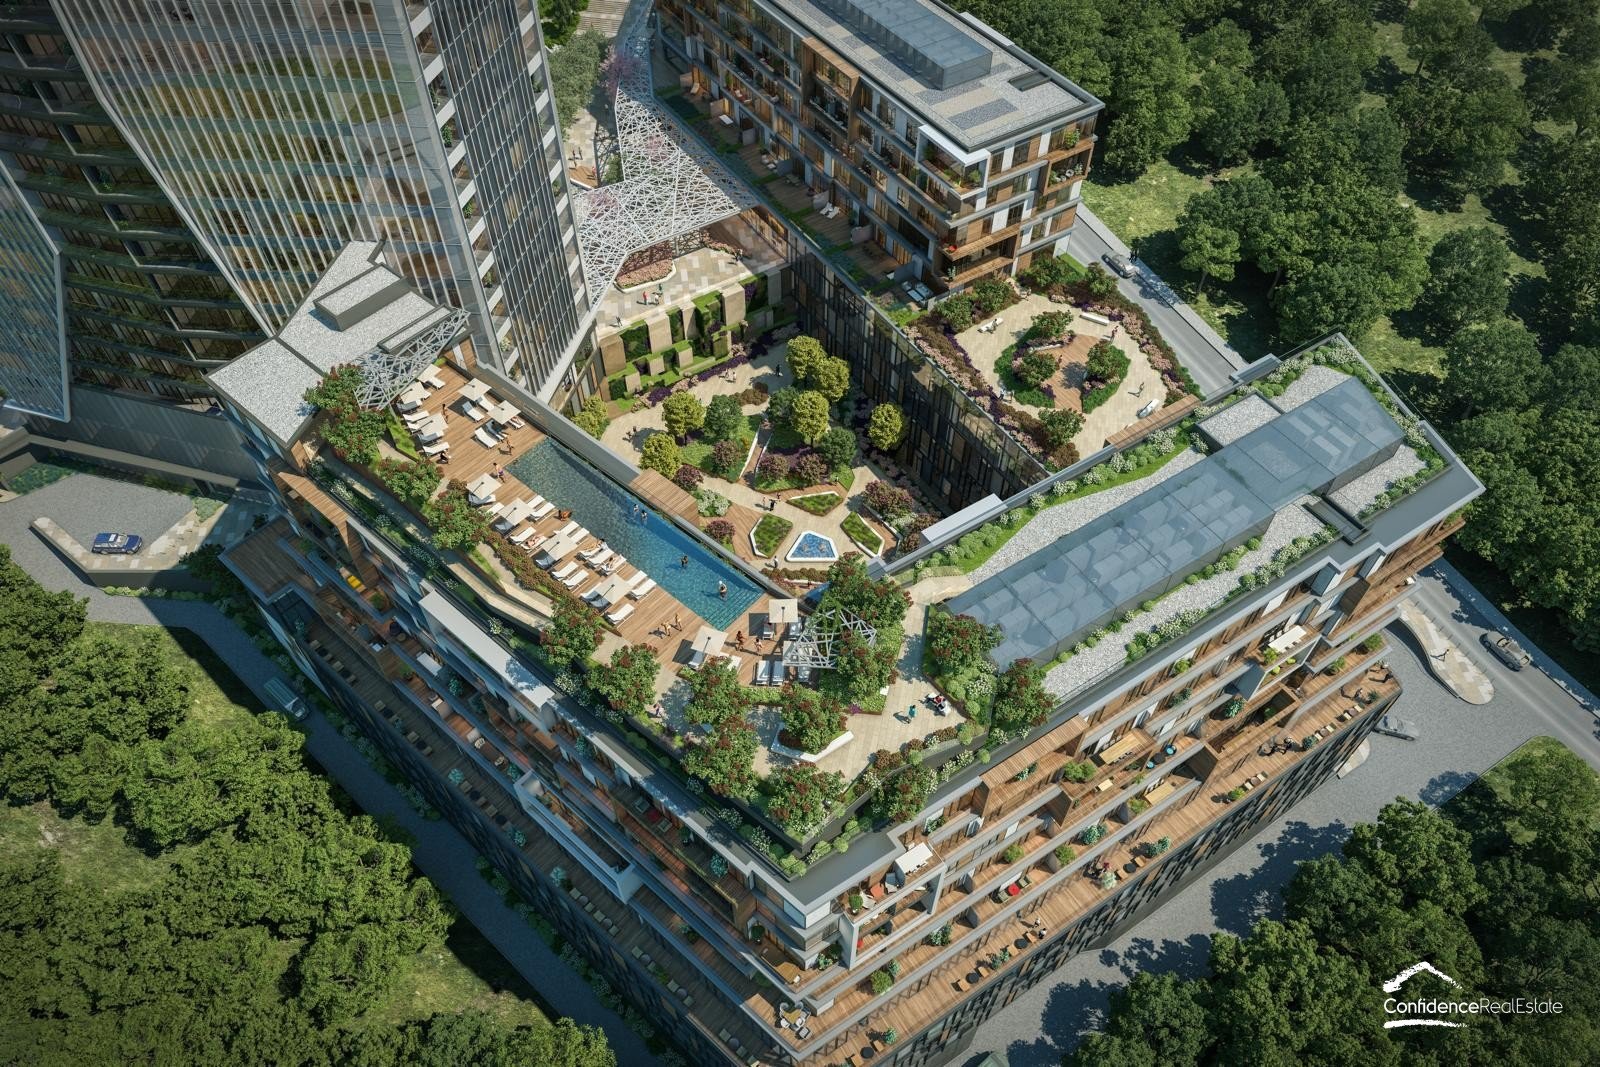 Luxurious project in the most promising area of Istanbul, Sisli